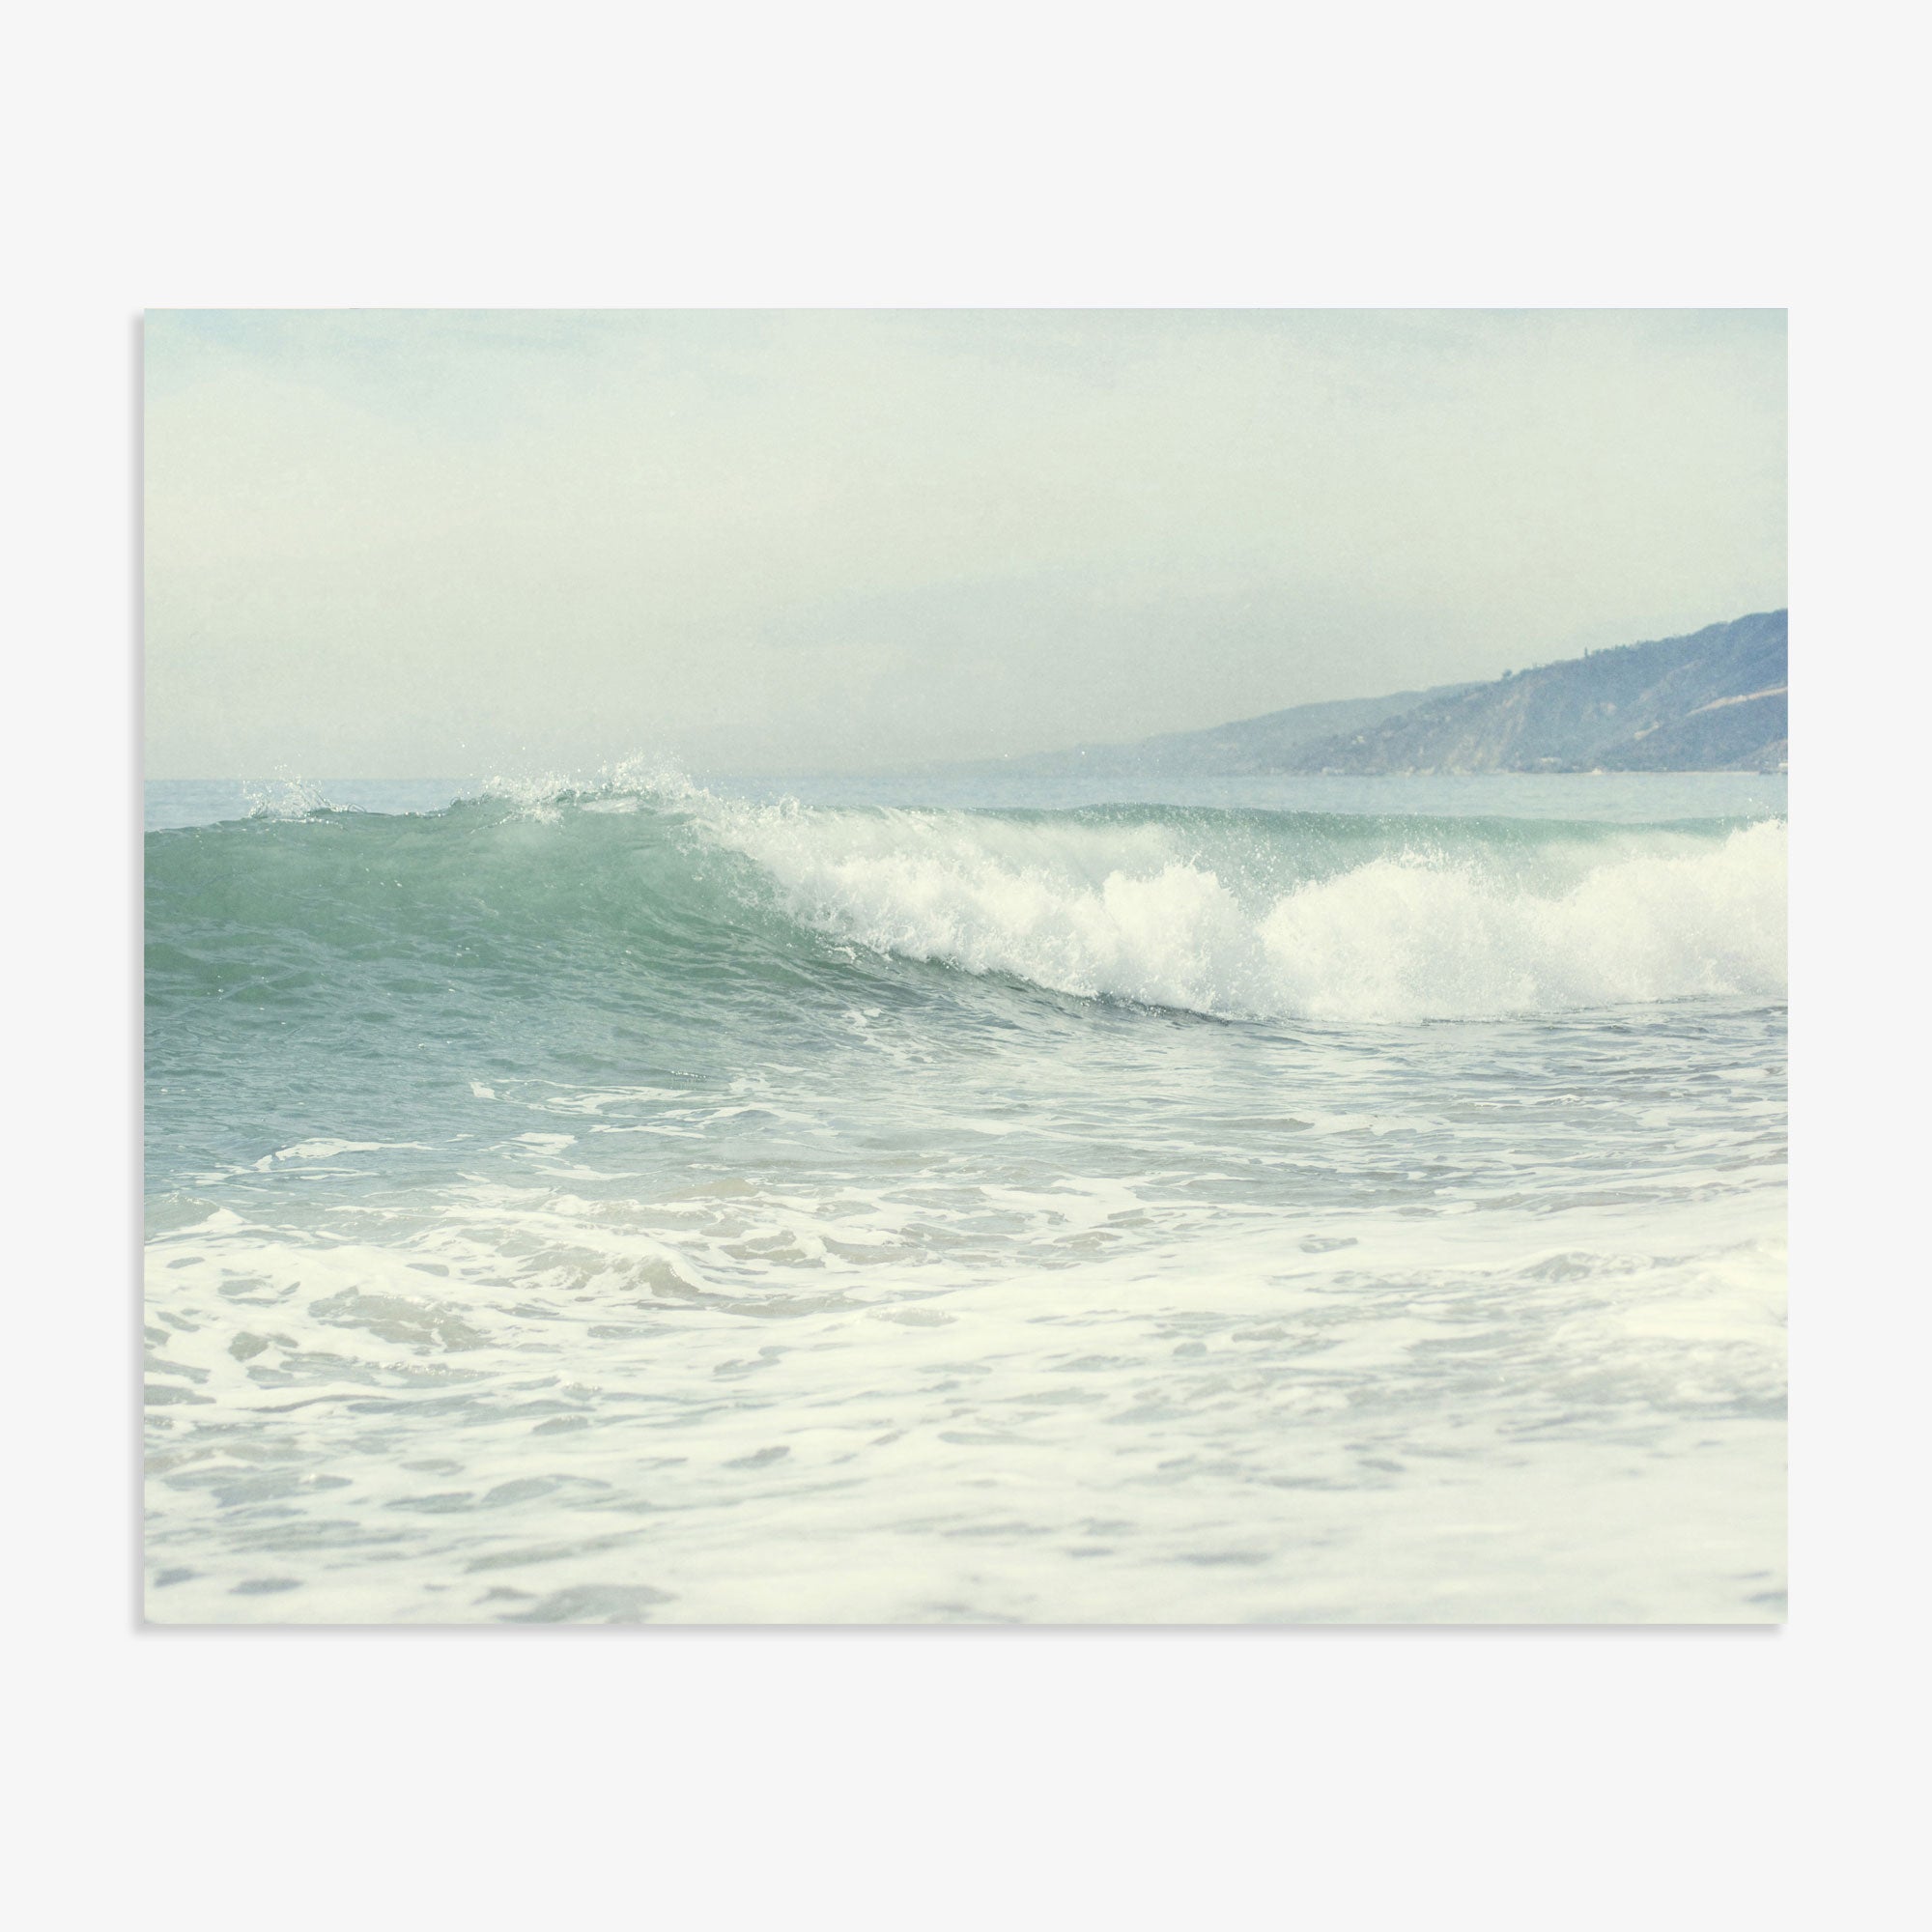 A serene Southern California beach scene depicting gentle waves rolling onto a sandy beach, with misty hills visible in the background under a soft, overcast sky. Offley Green&#39;s Coastal Print of a Breaking Wave &#39;Breaking Surf&#39;.